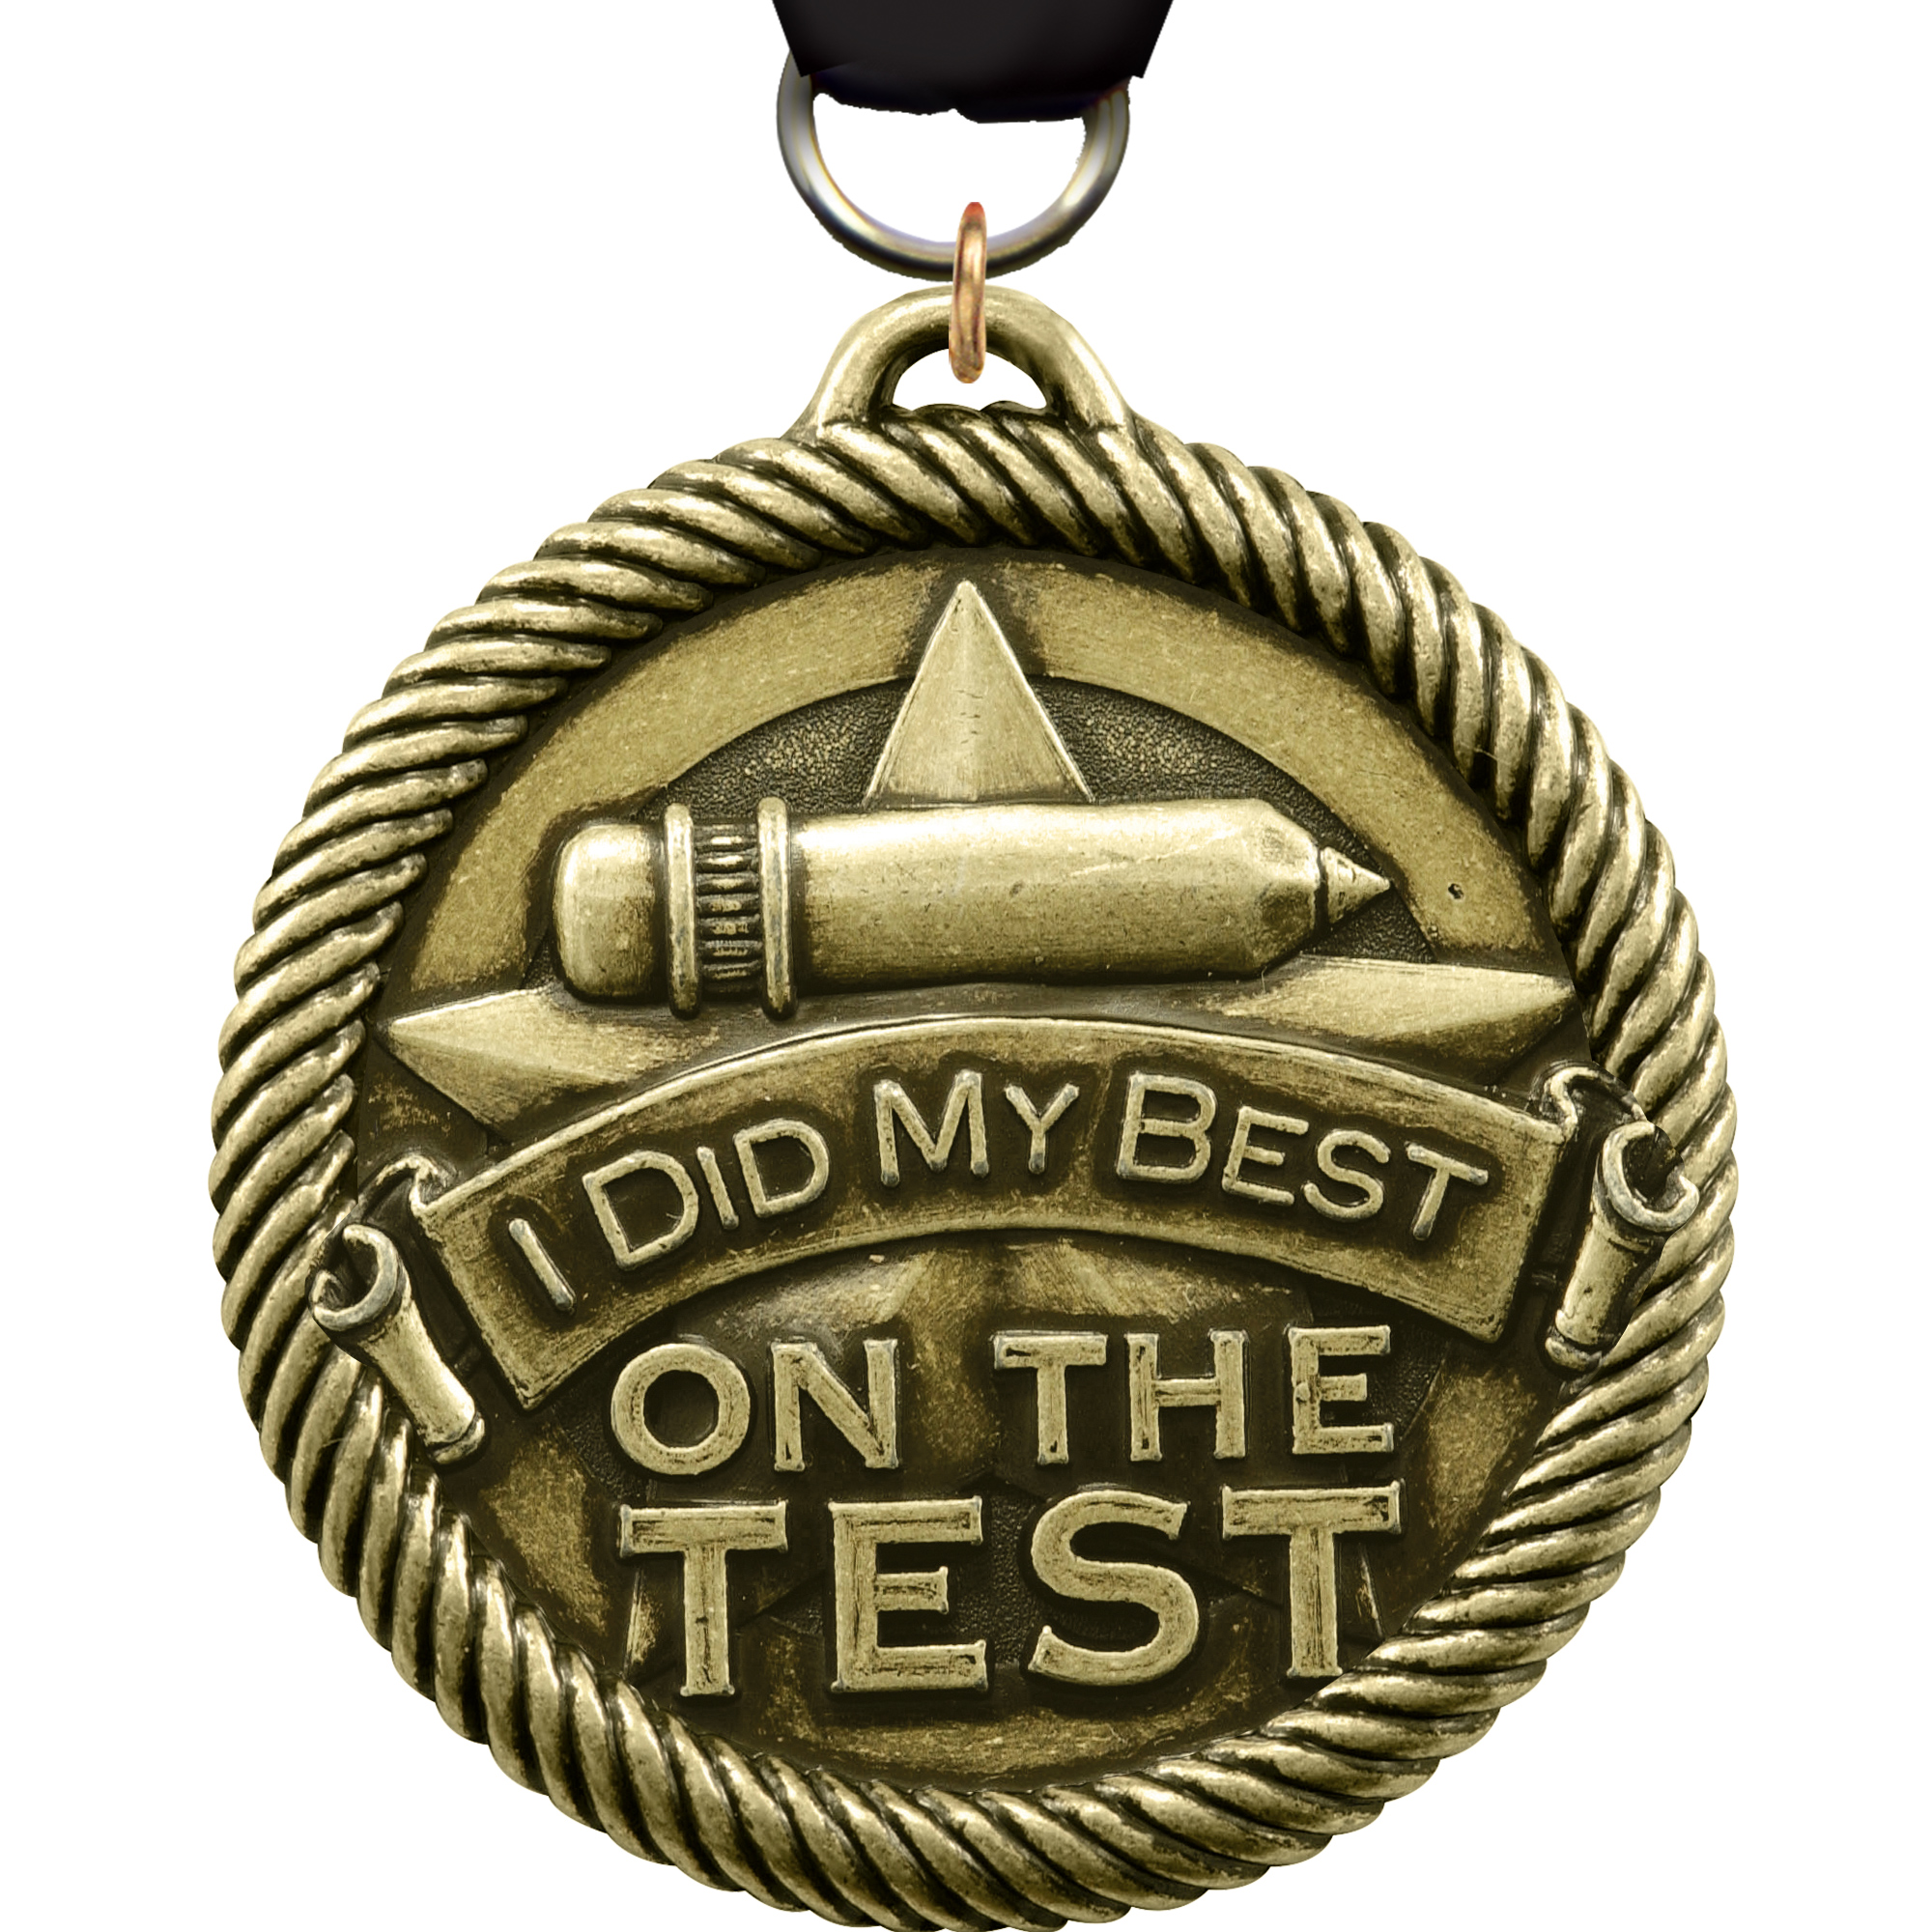 I did my best on the test Scholastic Medal